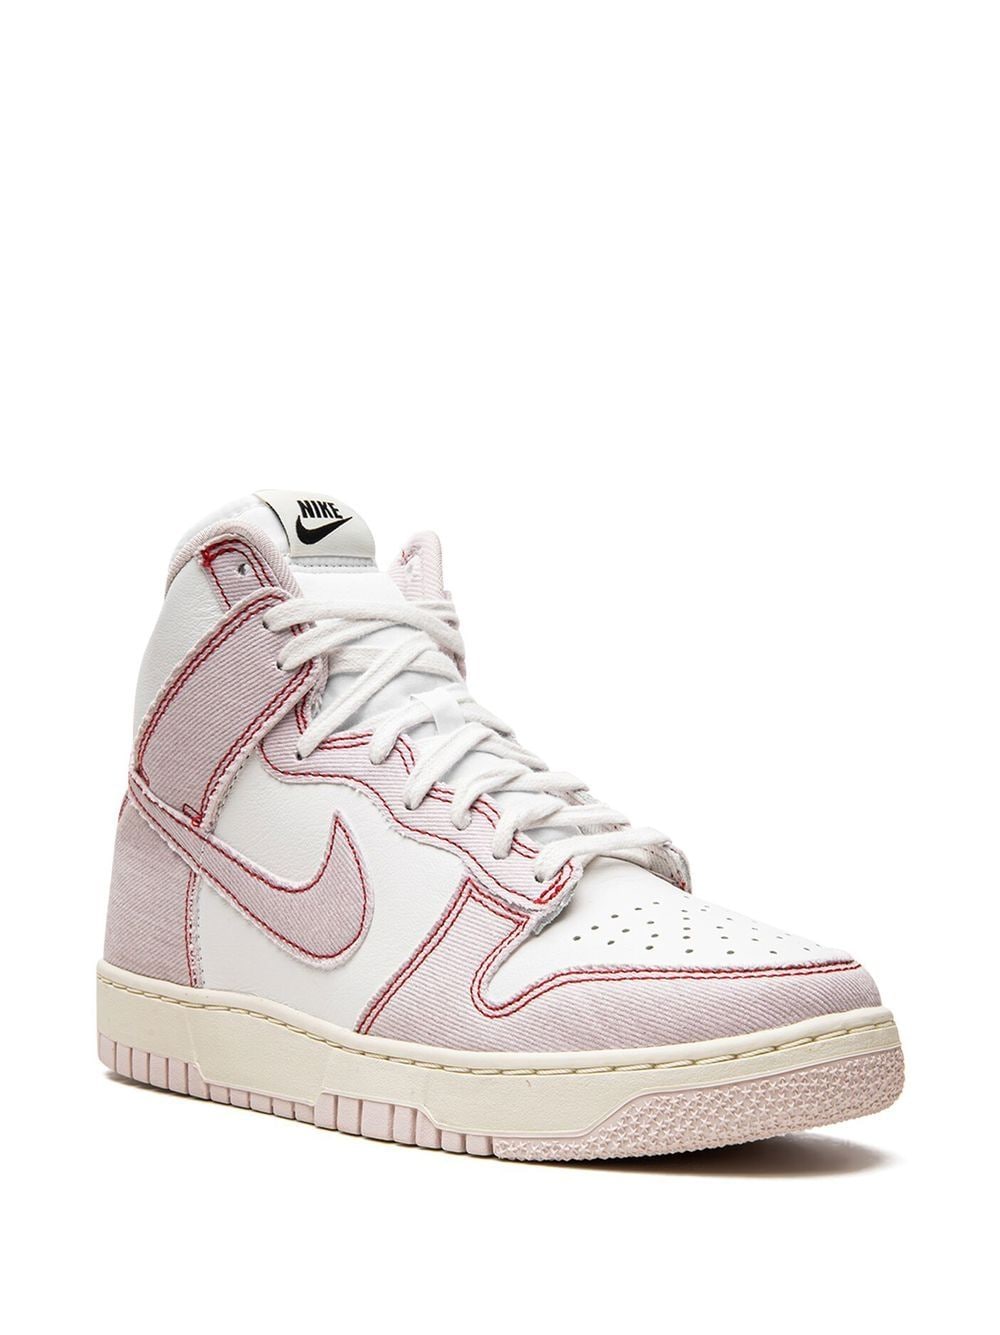 Image 2 of Nike Dunk High 1985 "Barely Rose Denim" sneakers